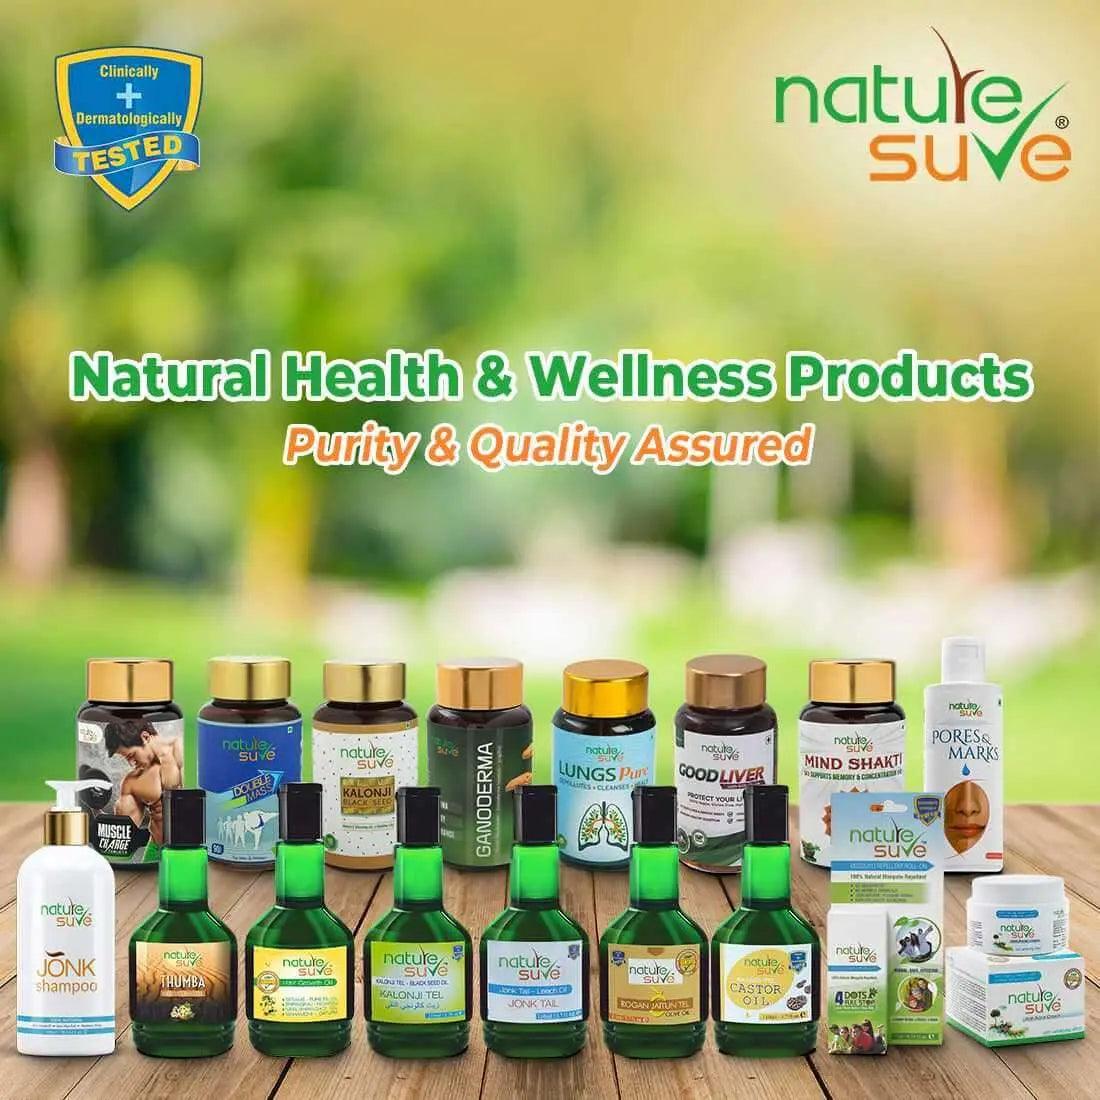 Nature Sure Combo: Double Mass and Muscle Charge Tablets for Body Mass and Muscle Strength